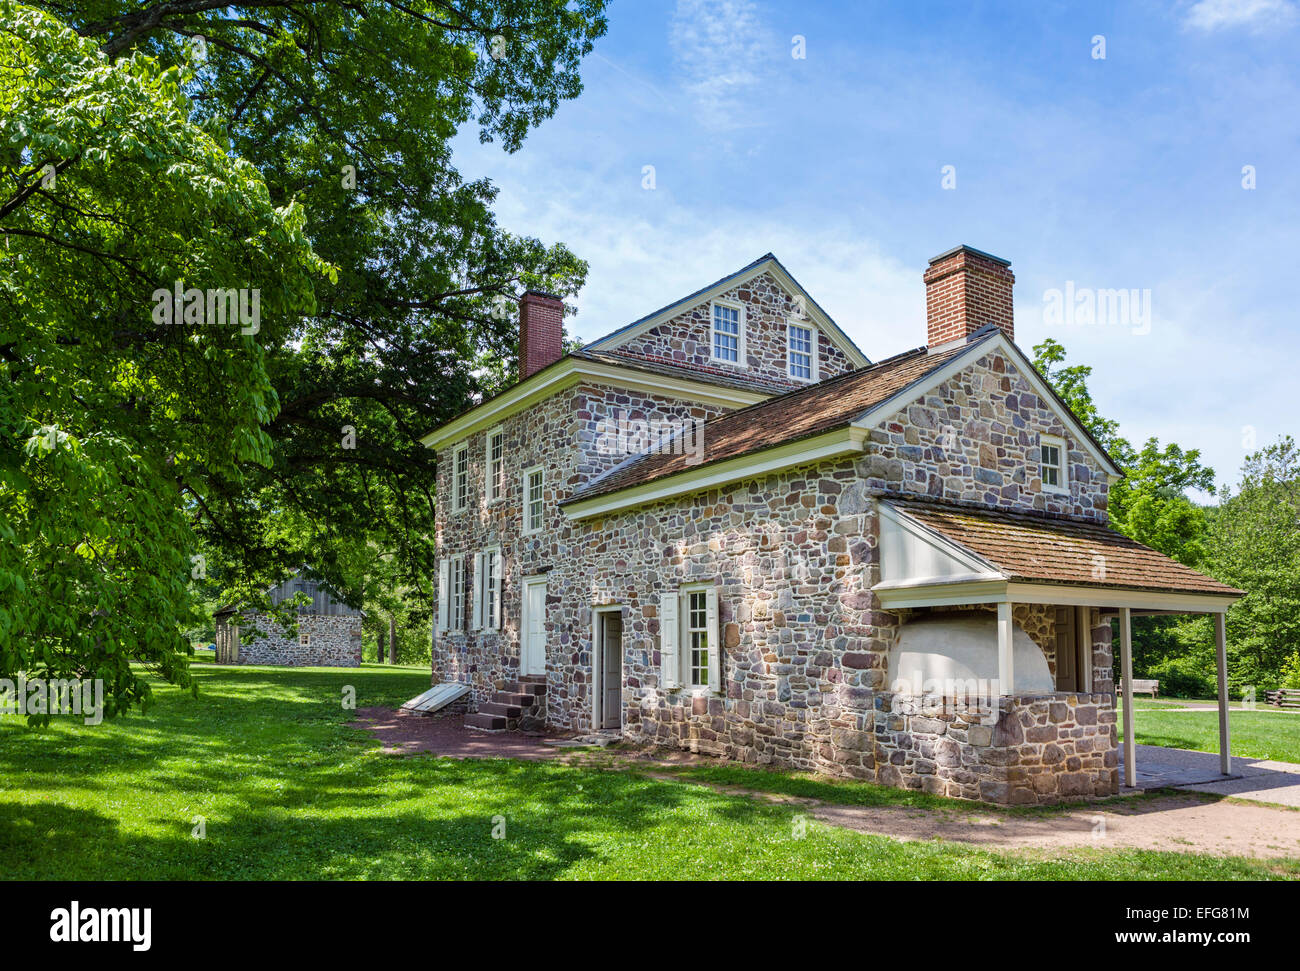 George Washington's Headquarters and home in winter of 1777/78, Valley Forge National Historical Park, Pennsylvania, USA Stock Photo